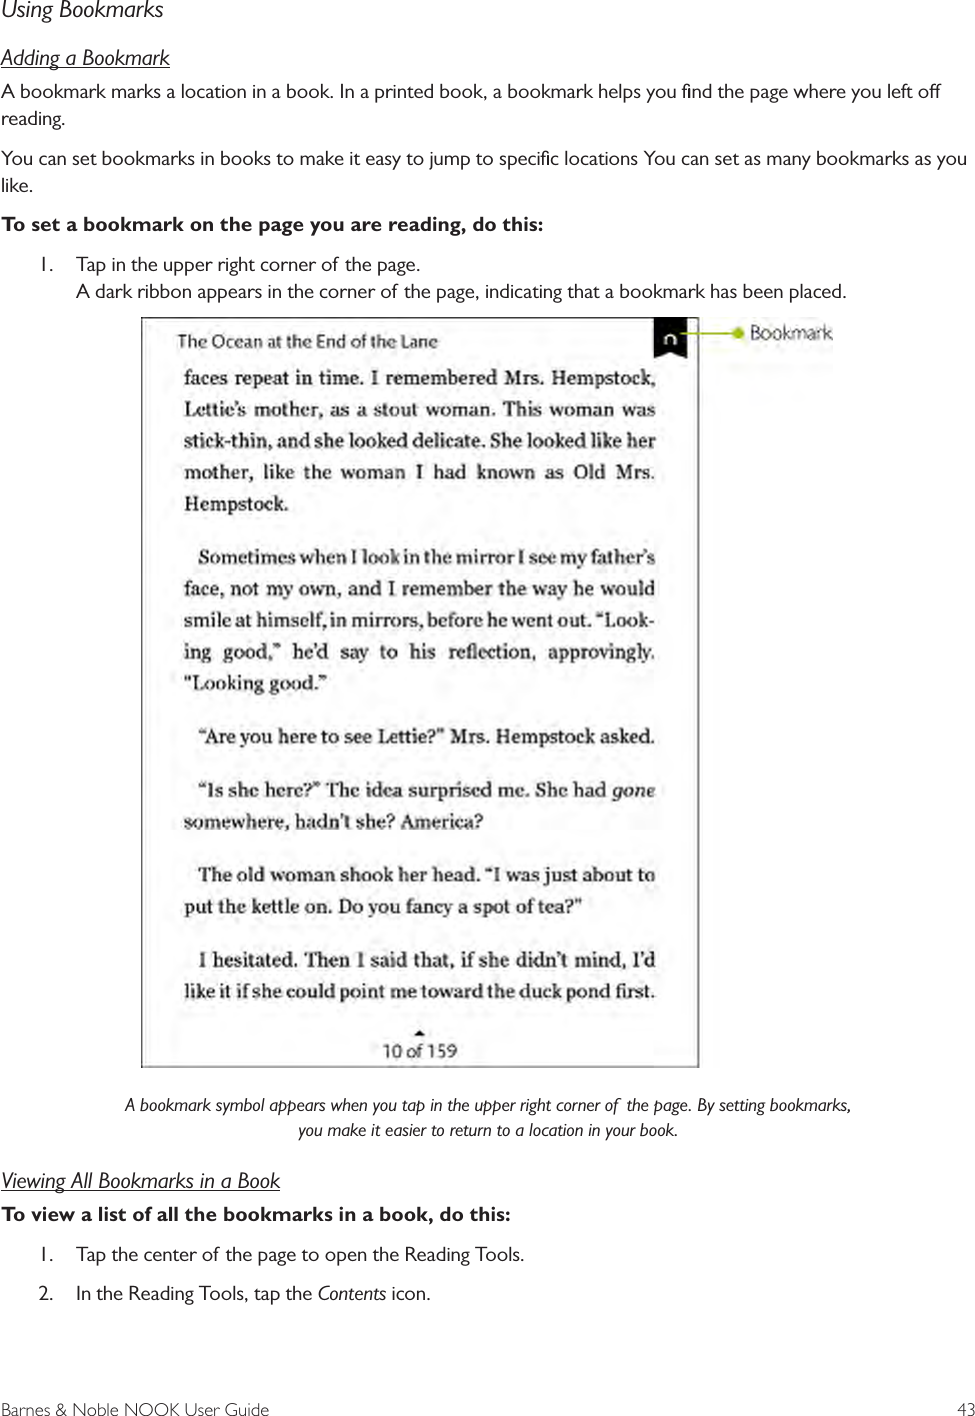 Barnes &amp; Noble NOOK User Guide  43Using BookmarksAdding a BookmarkA bookmark marks a location in a book. In a printed book, a bookmark helps you ﬁnd the page where you left o reading. You can set bookmarks in books to make it easy to jump to speciﬁc locations You can set as many bookmarks as you like. To set a bookmark on the page you are reading, do this:1.  Tap in the upper right corner of the page. A dark ribbon appears in the corner of the page, indicating that a bookmark has been placed.A bookmark symbol appears when you tap in the upper right corner of  the page. By setting bookmarks, you make it easier to return to a location in your book.Viewing All Bookmarks in a BookTo view a list of all the bookmarks in a book, do this:1.  Tap the center of the page to open the Reading Tools.2.  In the Reading Tools, tap the Contents icon.